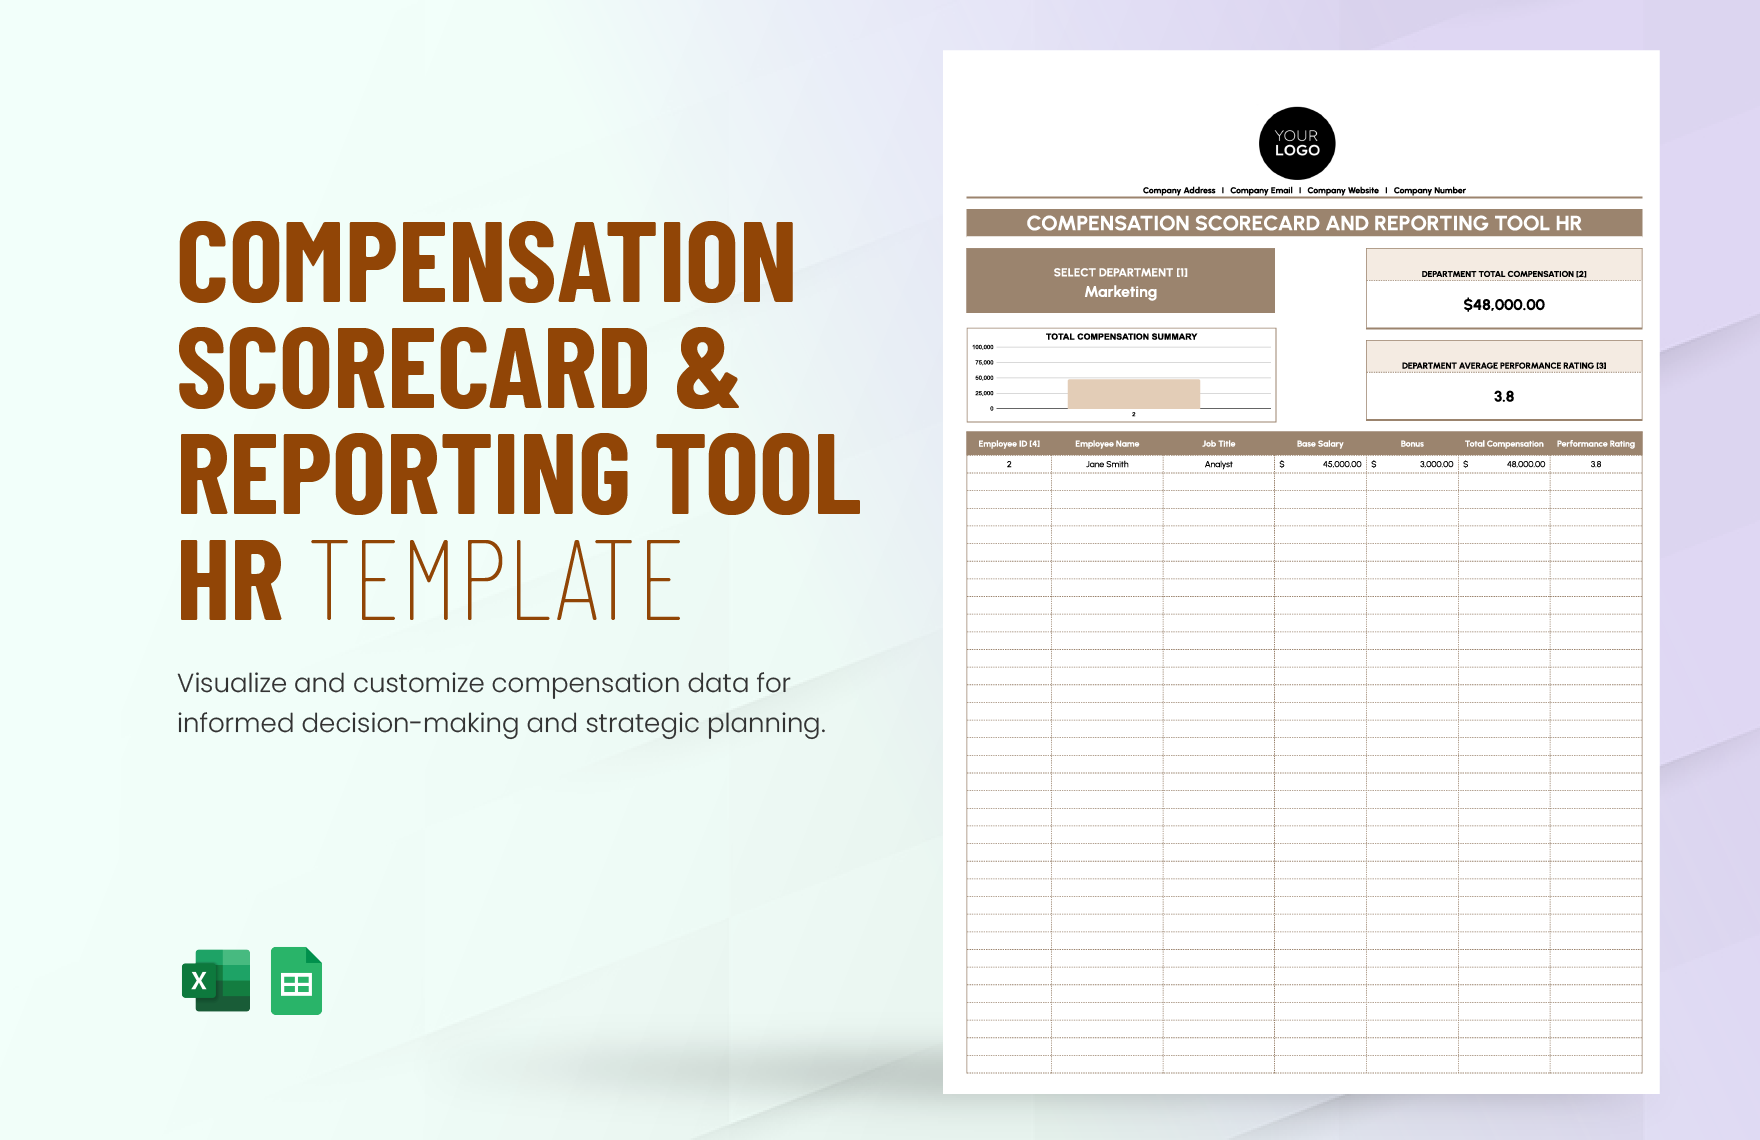 Compensation Scorecard and Reporting Tool HR Template